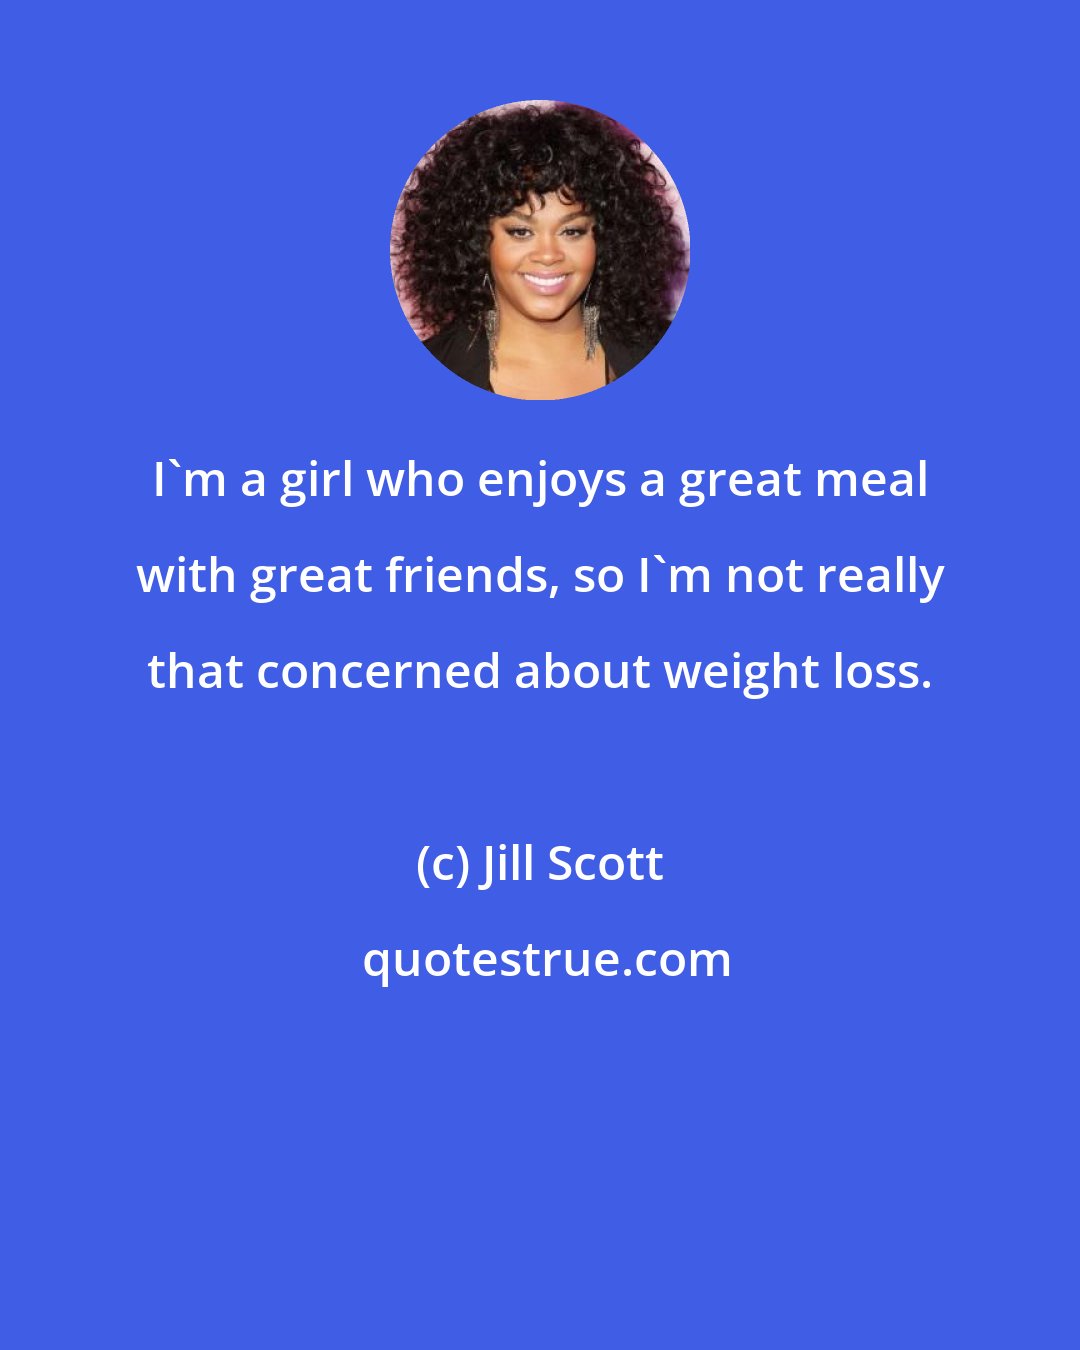 Jill Scott: I'm a girl who enjoys a great meal with great friends, so I'm not really that concerned about weight loss.